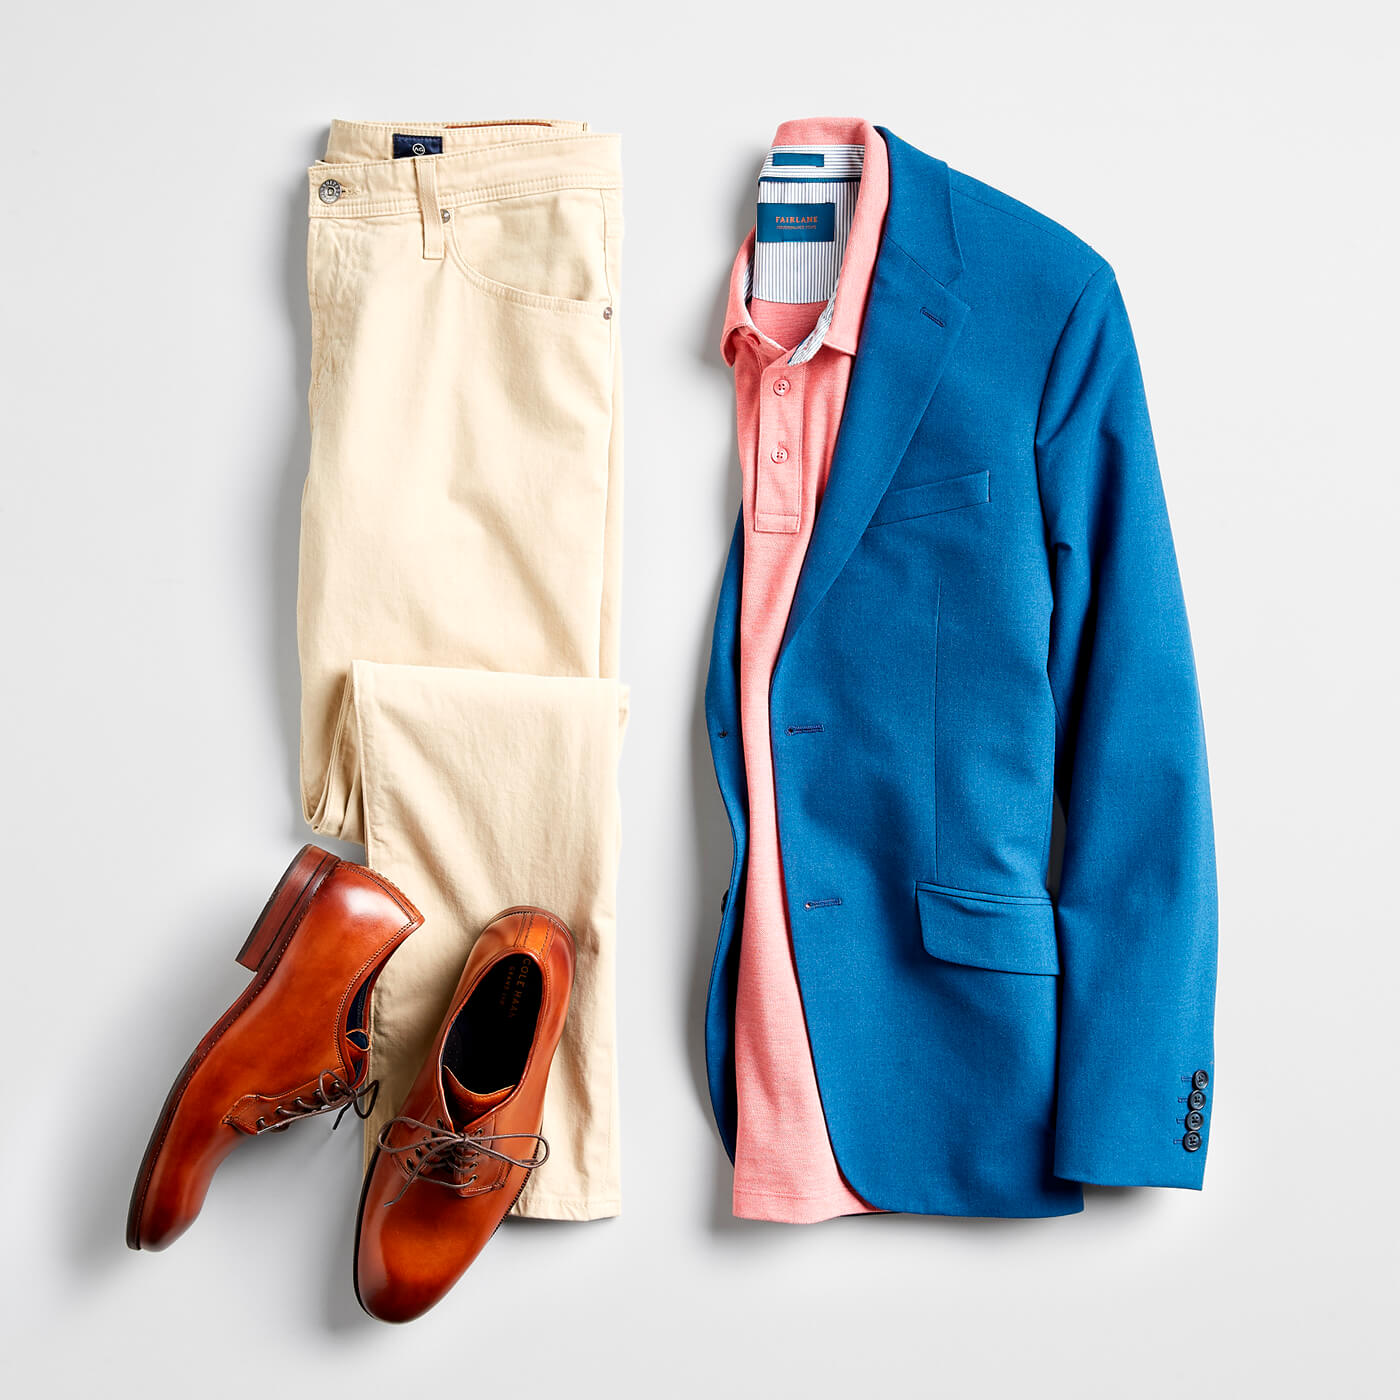 polo and blue blazer outfit